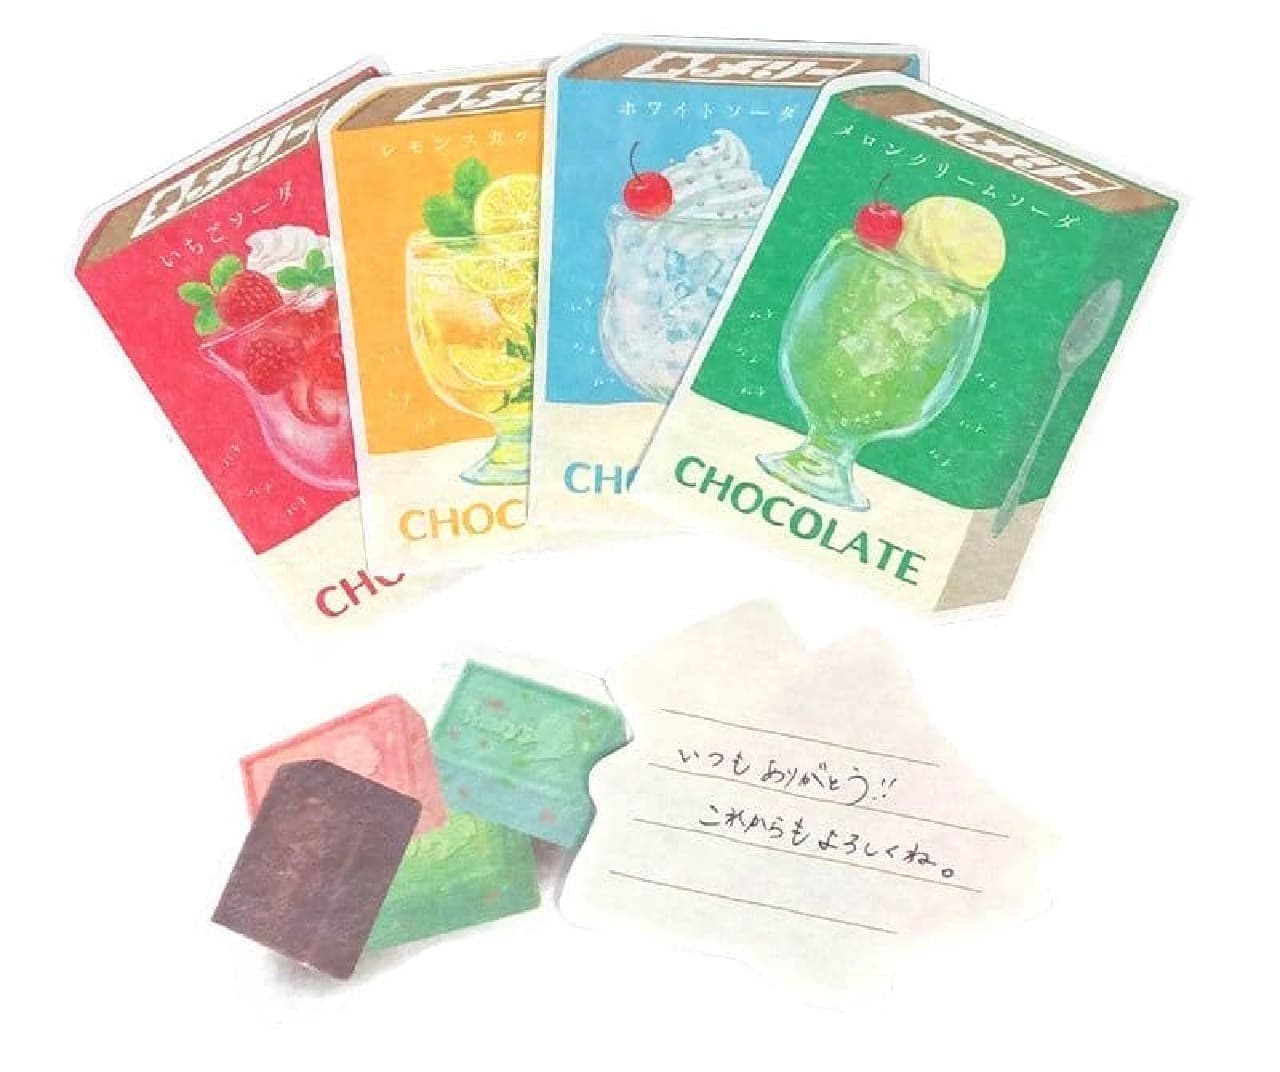 Original letter set of "Online limited Merry x Furukawa Paper Works popping candy chocolate. Original collaboration BOX"